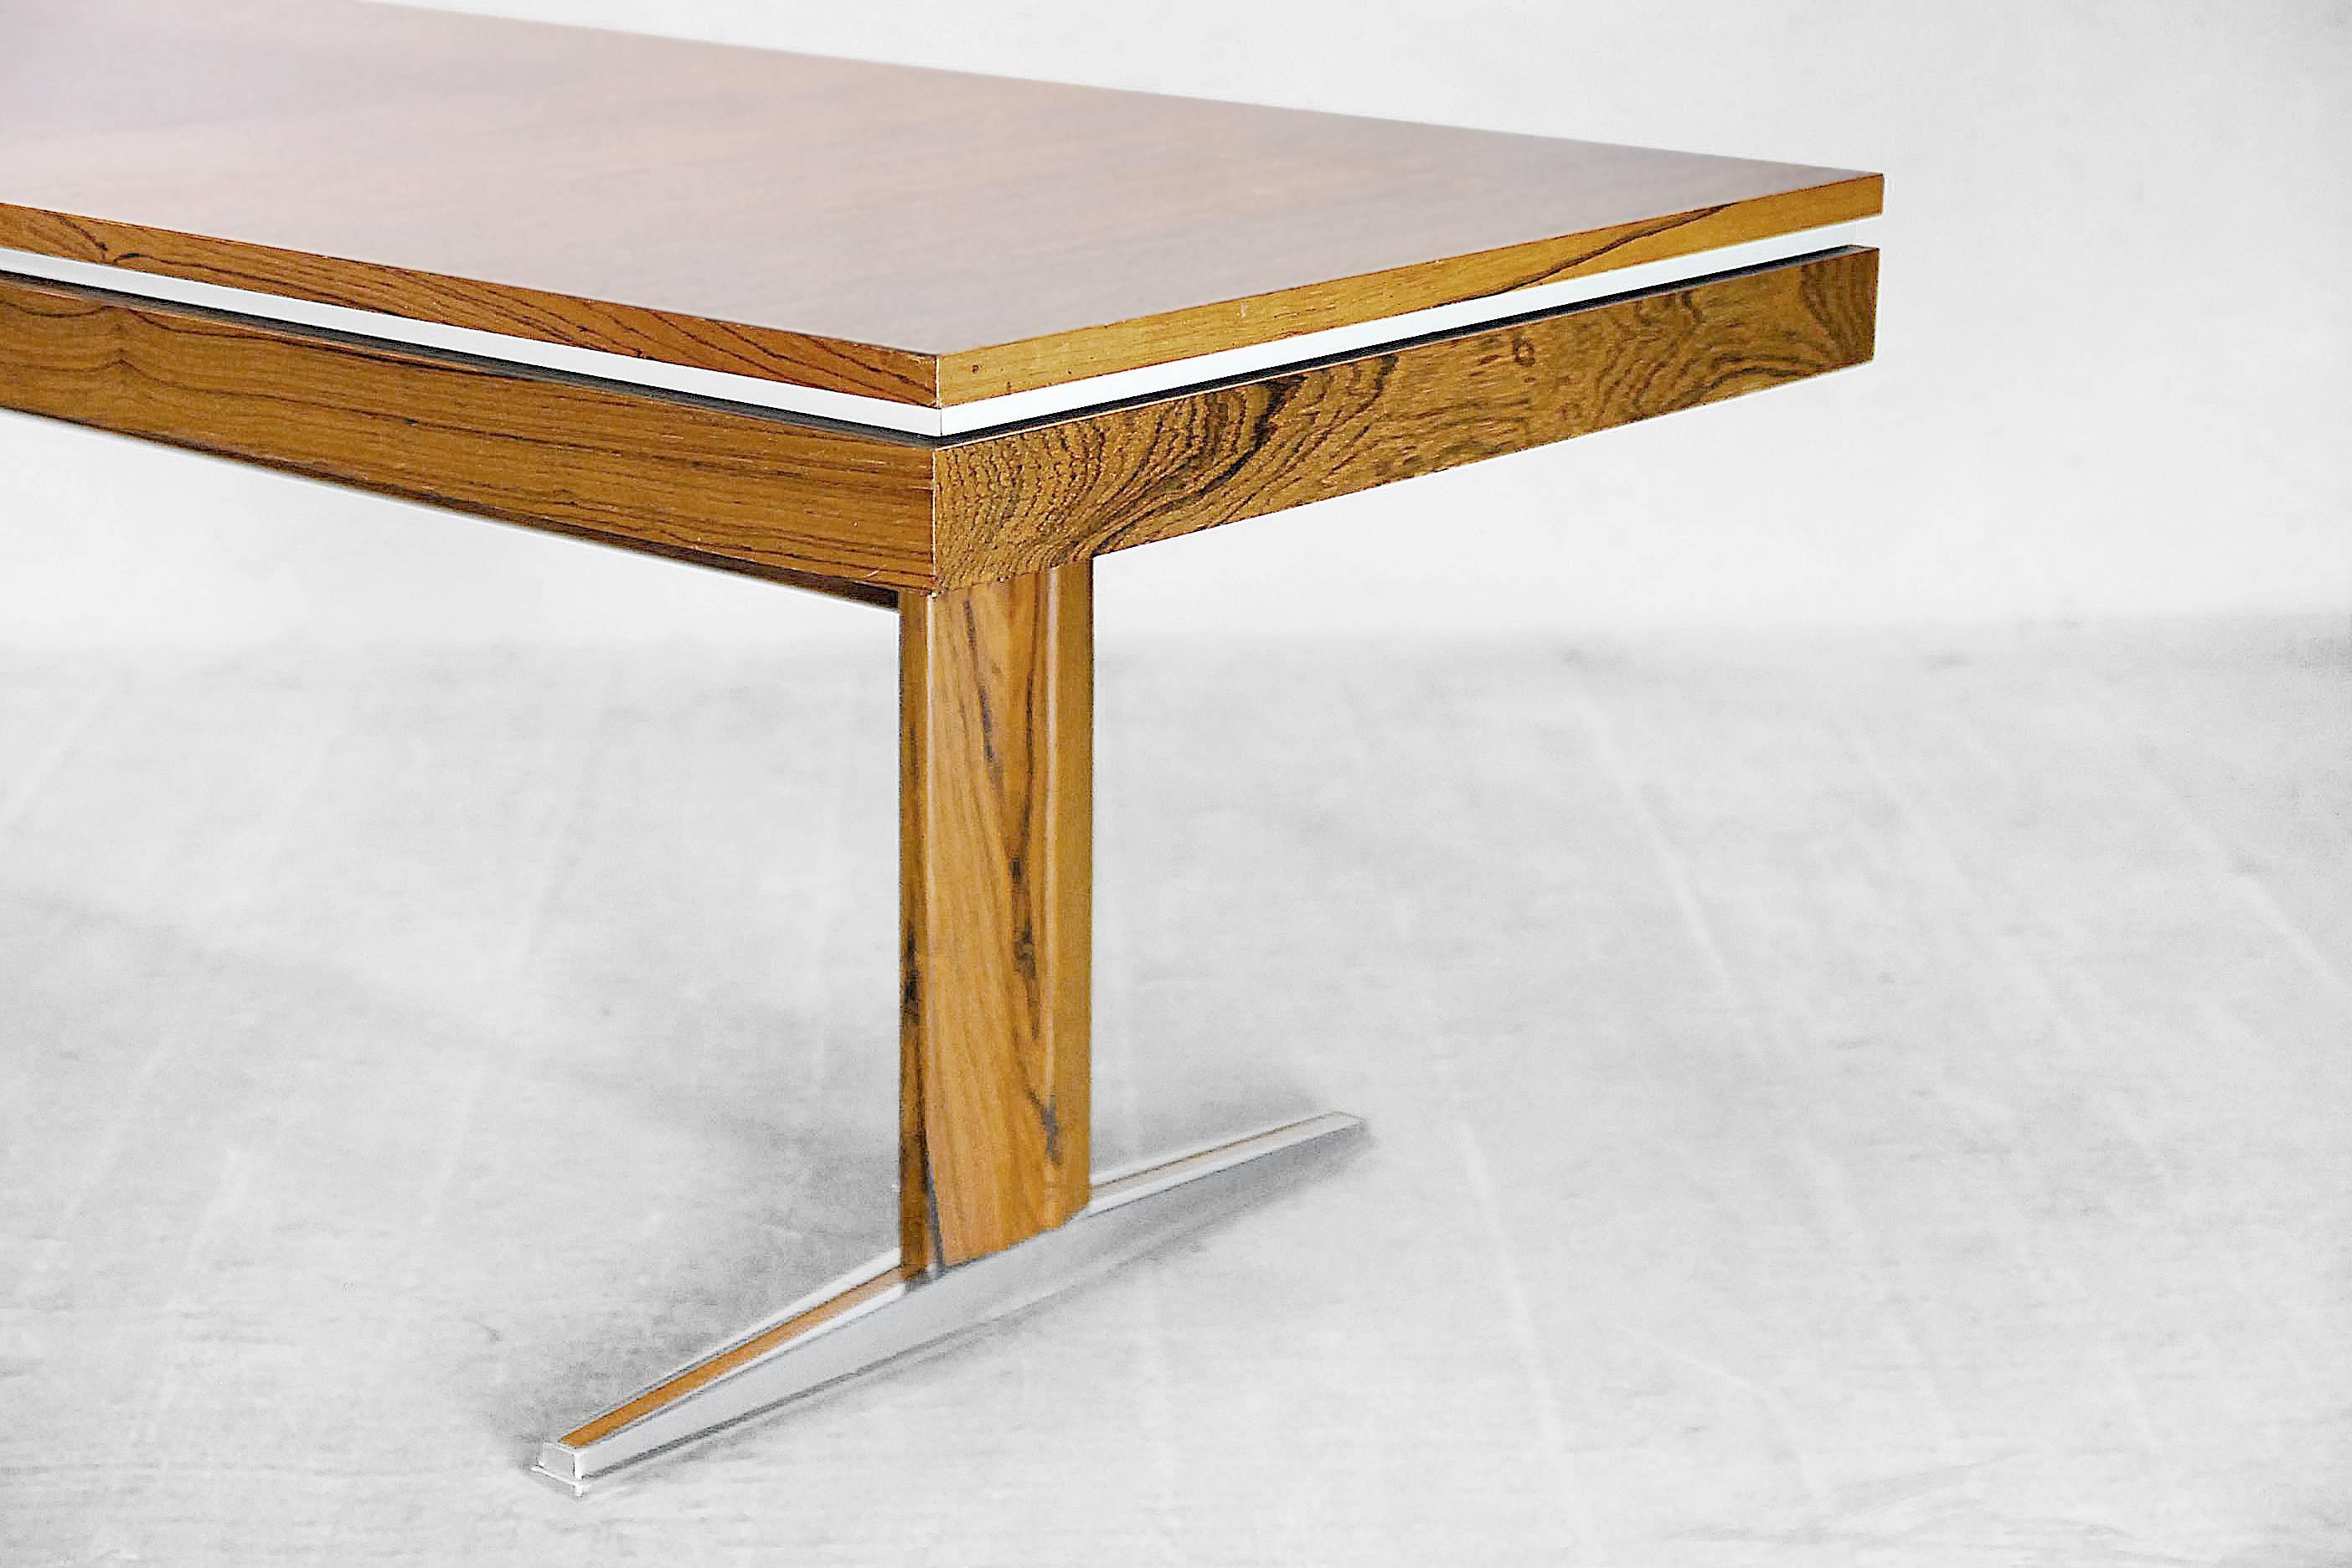 This rosewood folding side or dining table was manufactured by E.M.Ü in Germany during the 1960s. It has a two sliding tops and under them is a hidden shelf. Under the shelf there is a screw mechanism with a crank, which adjusts the height of top